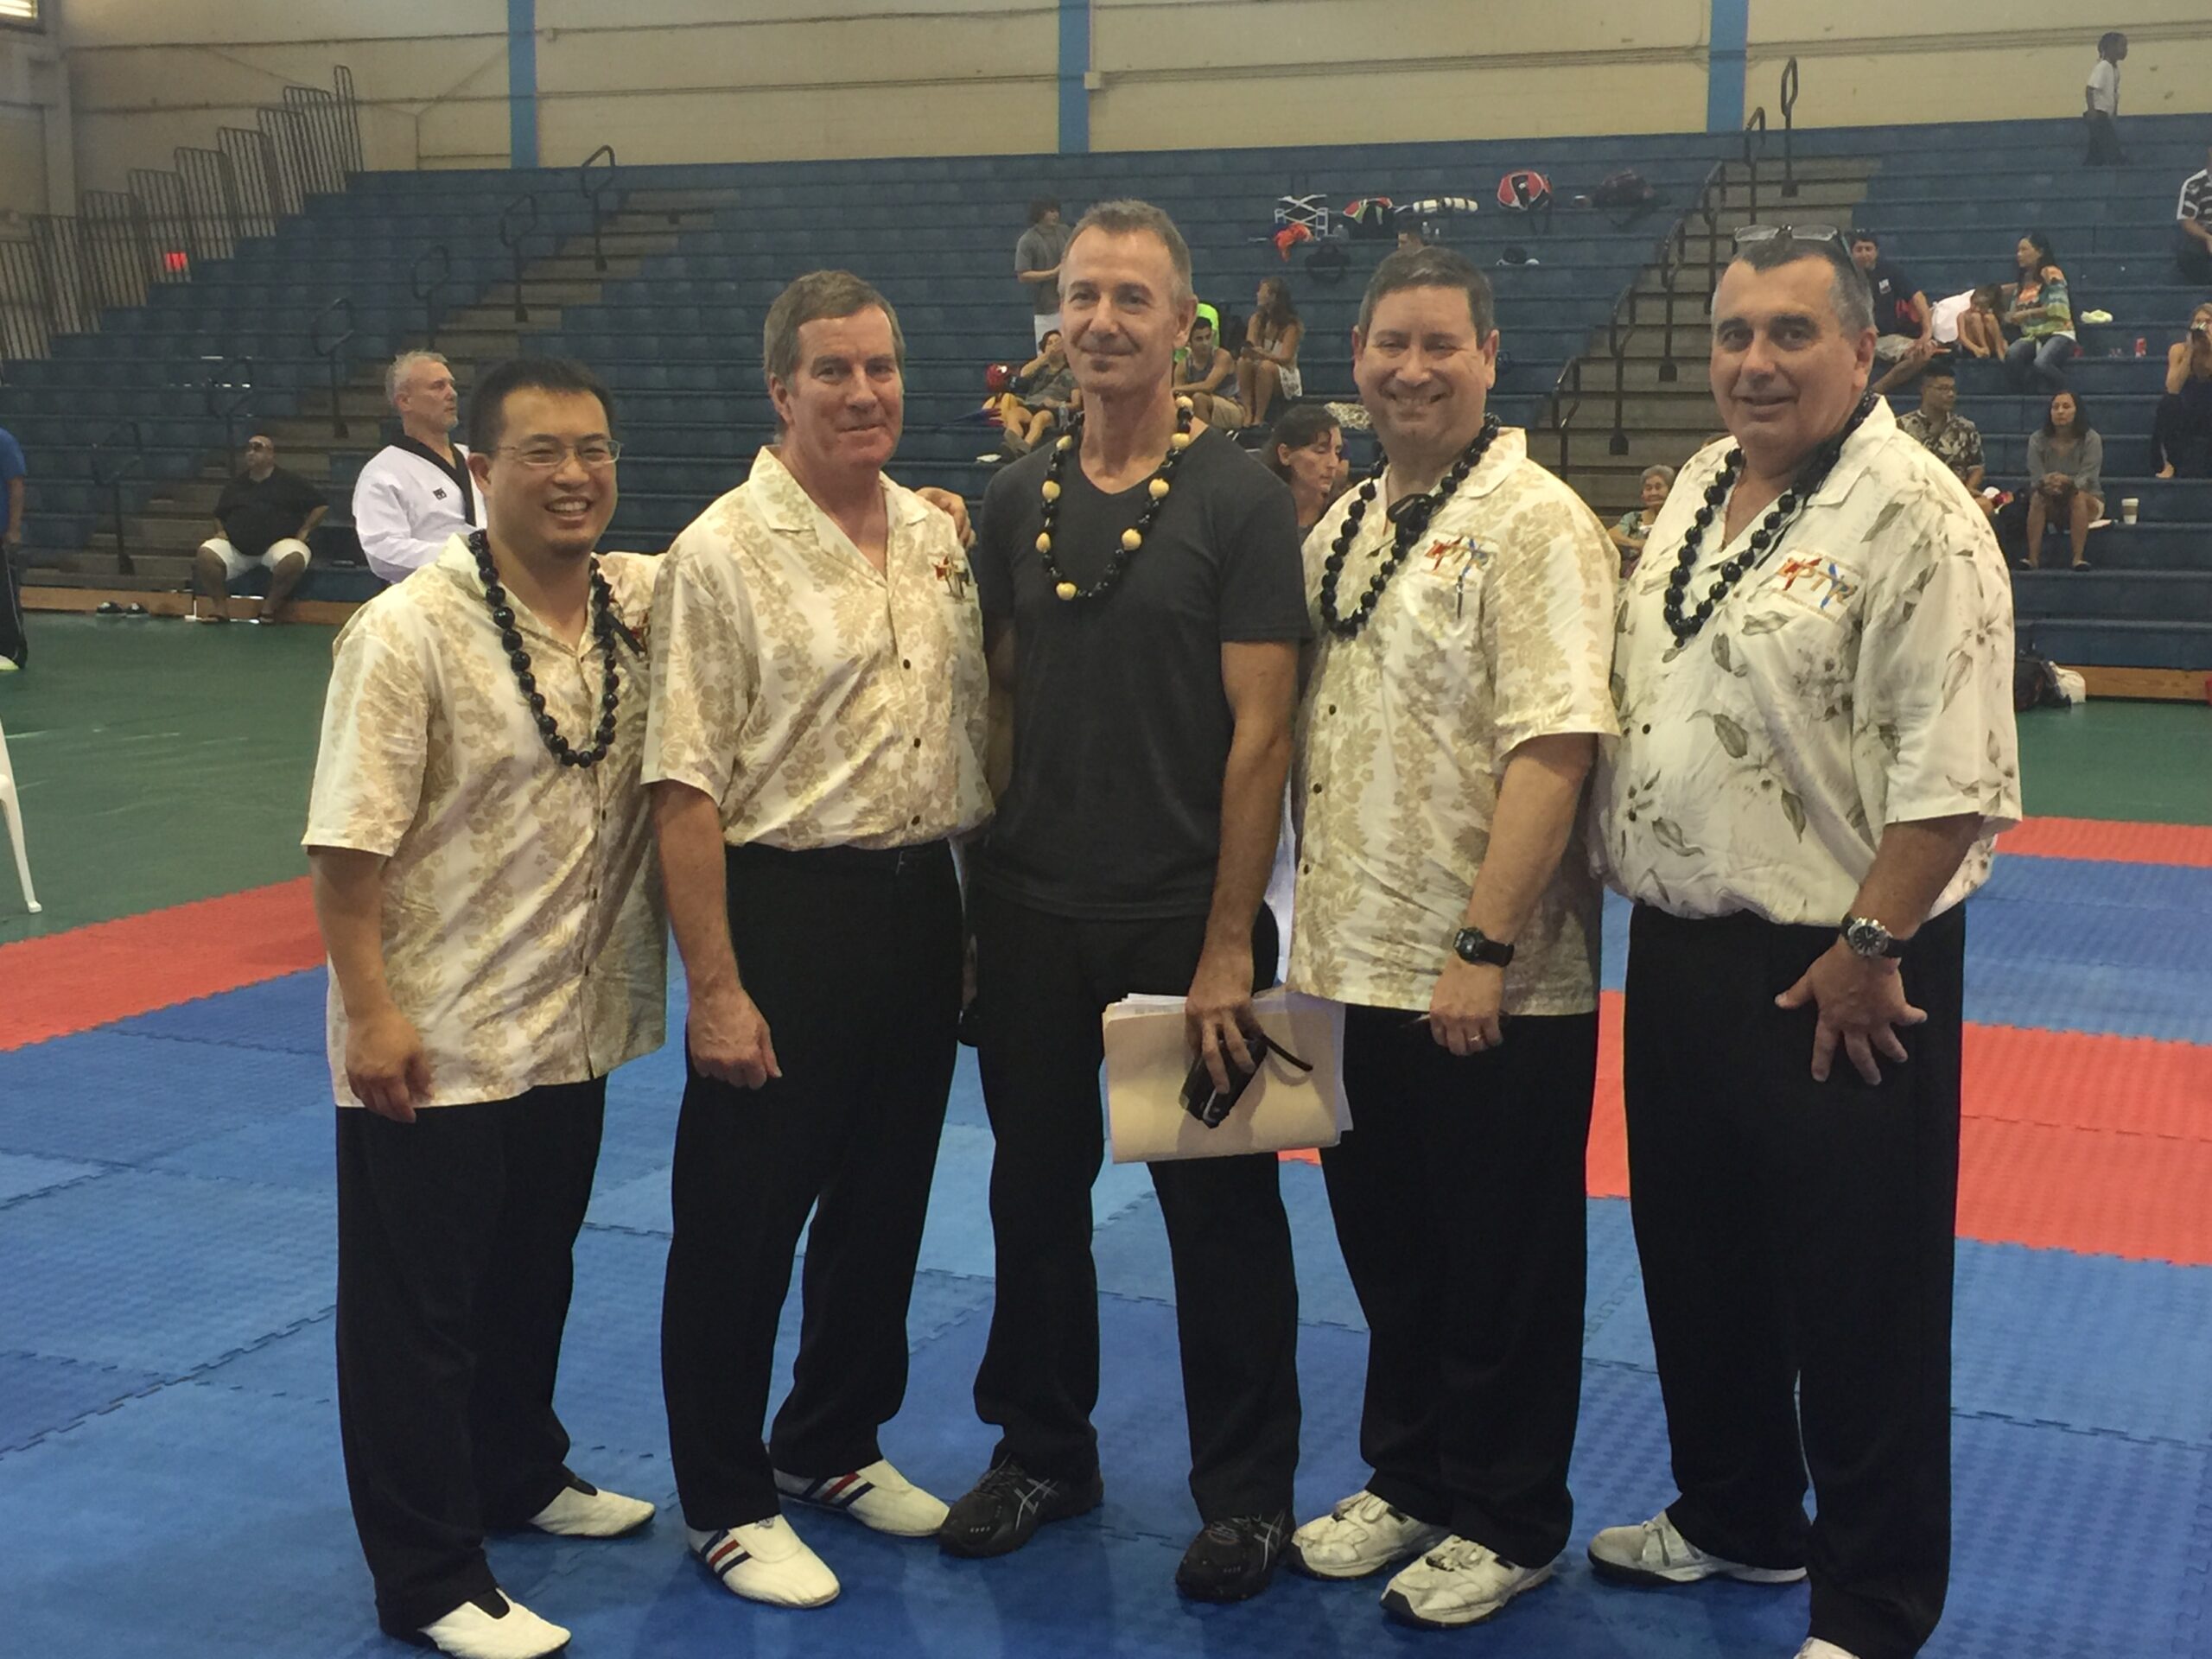 International Referees at the Maui Open